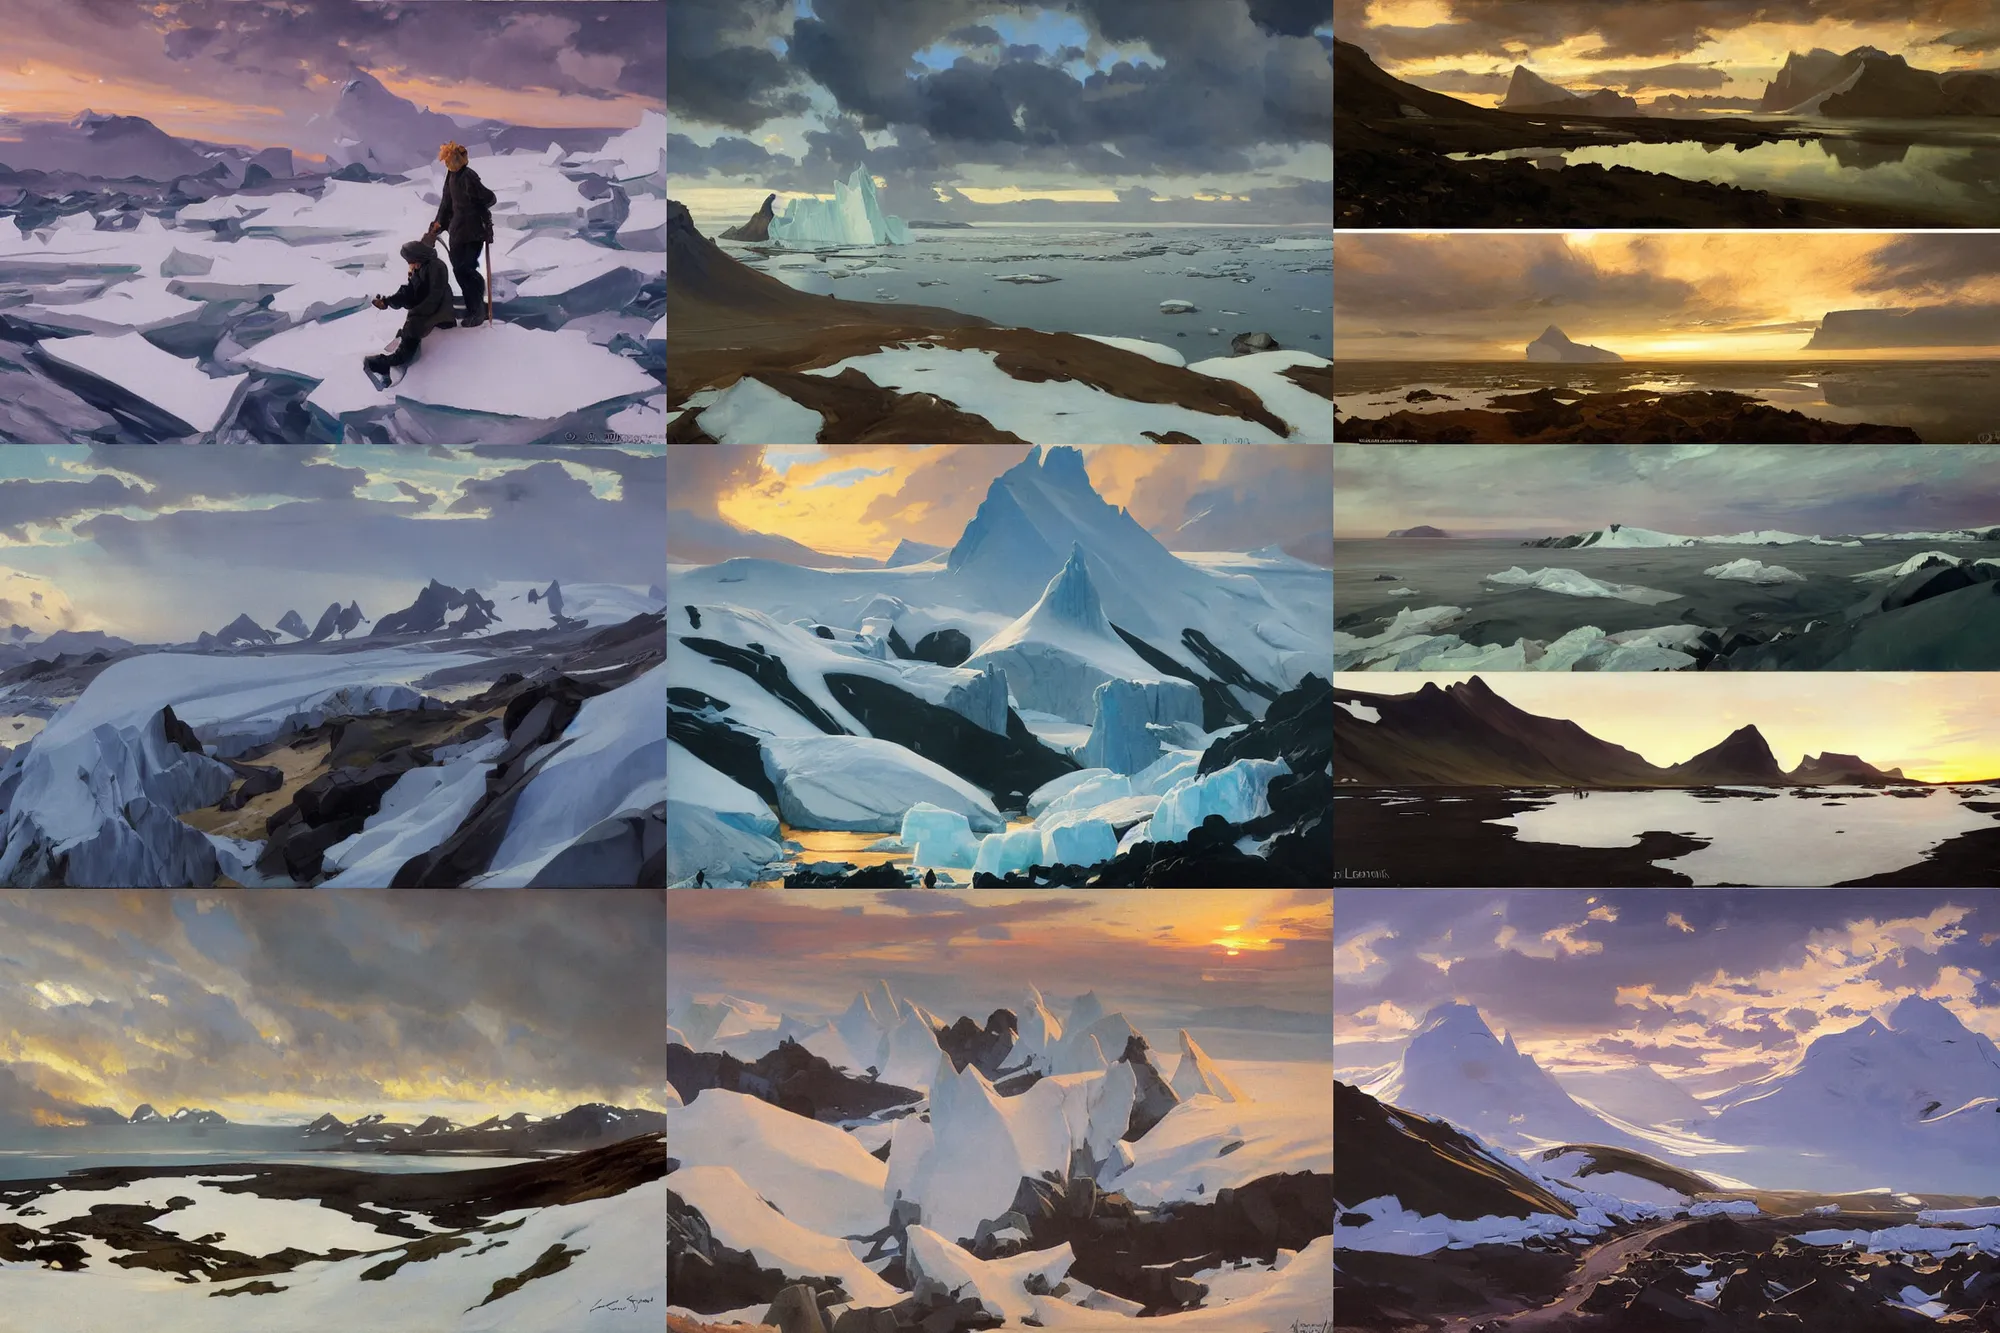 Prompt: painting by sargent leyendecker and gurney, rhads, vasnetsov, savrasov levitan polenov, middle ages, sunset sinrise, above the layered low clouds travel path road to sea bay view photo of greenland and iceland glacier and icebergs overcast sharpen details darkest night black sky